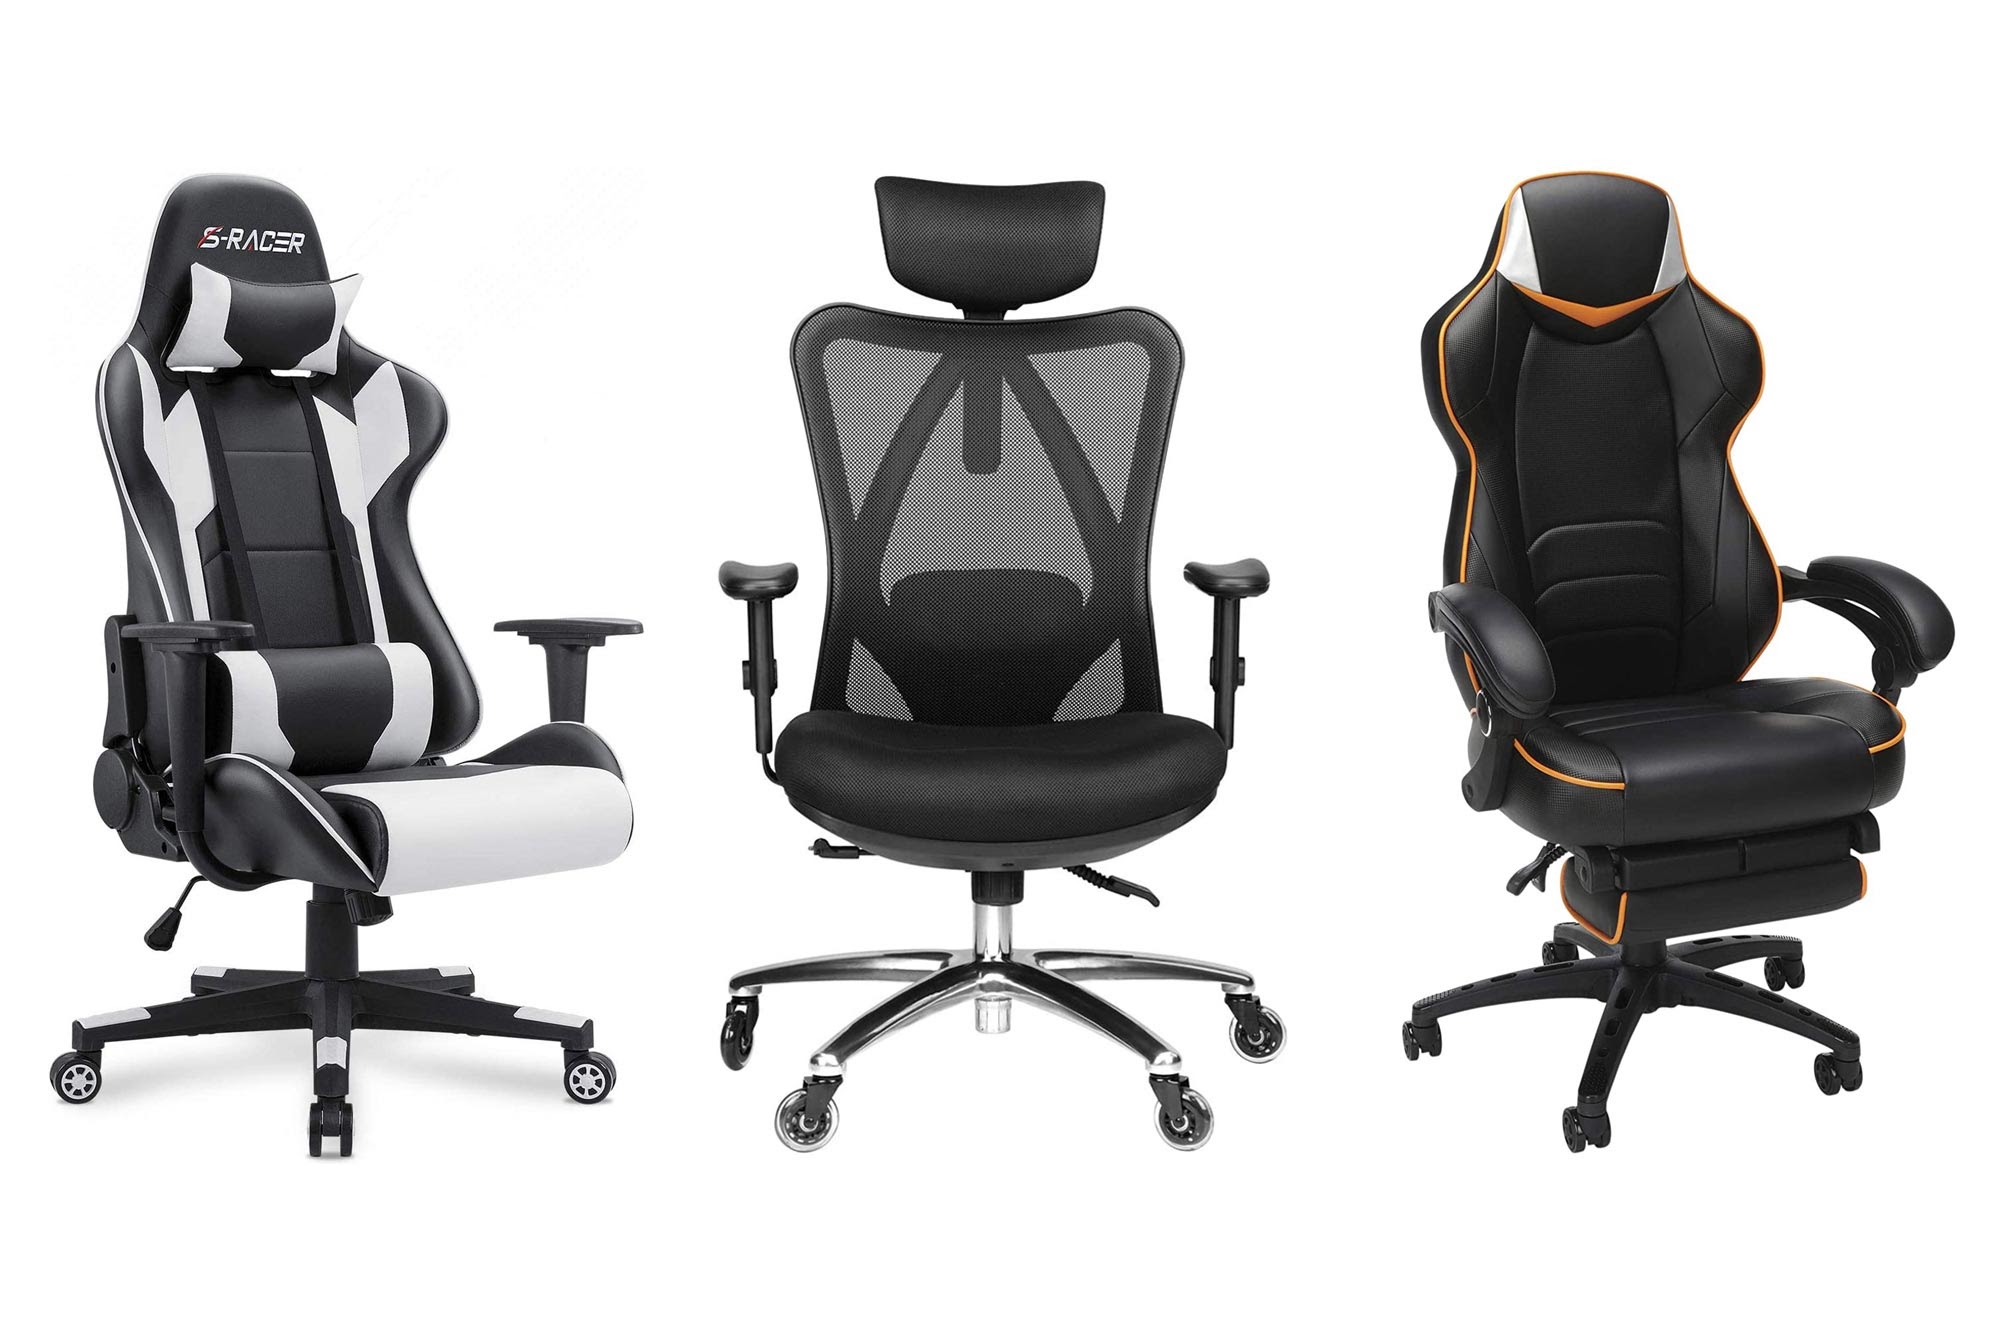 Why a good chair is an important part of gaming 1